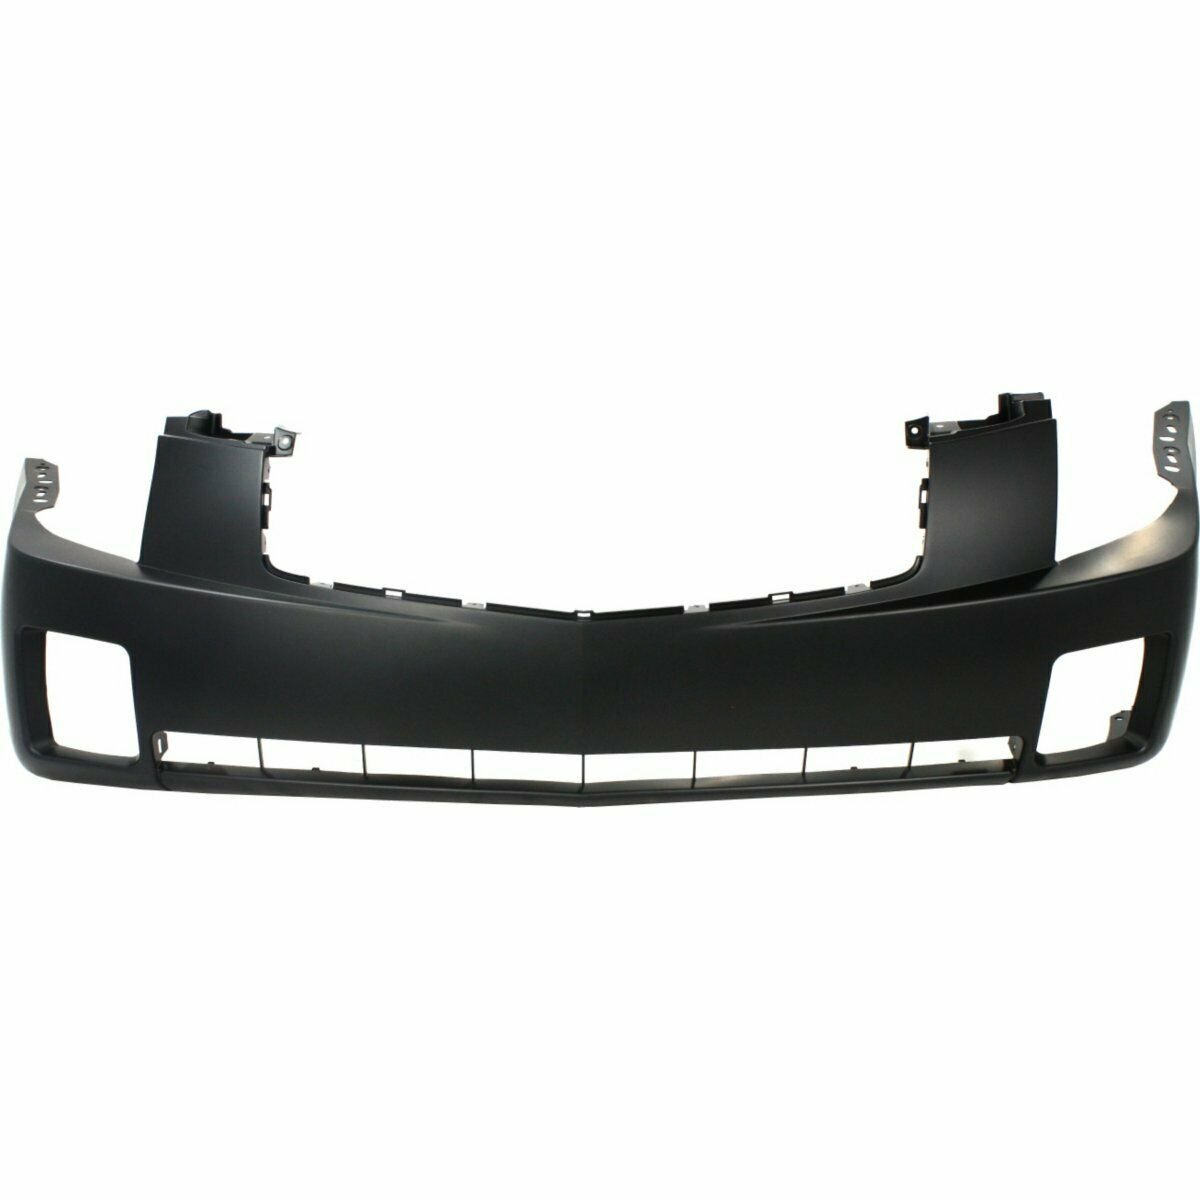 2003-2007 Cadillac CTS Front Bumper Painted to Match